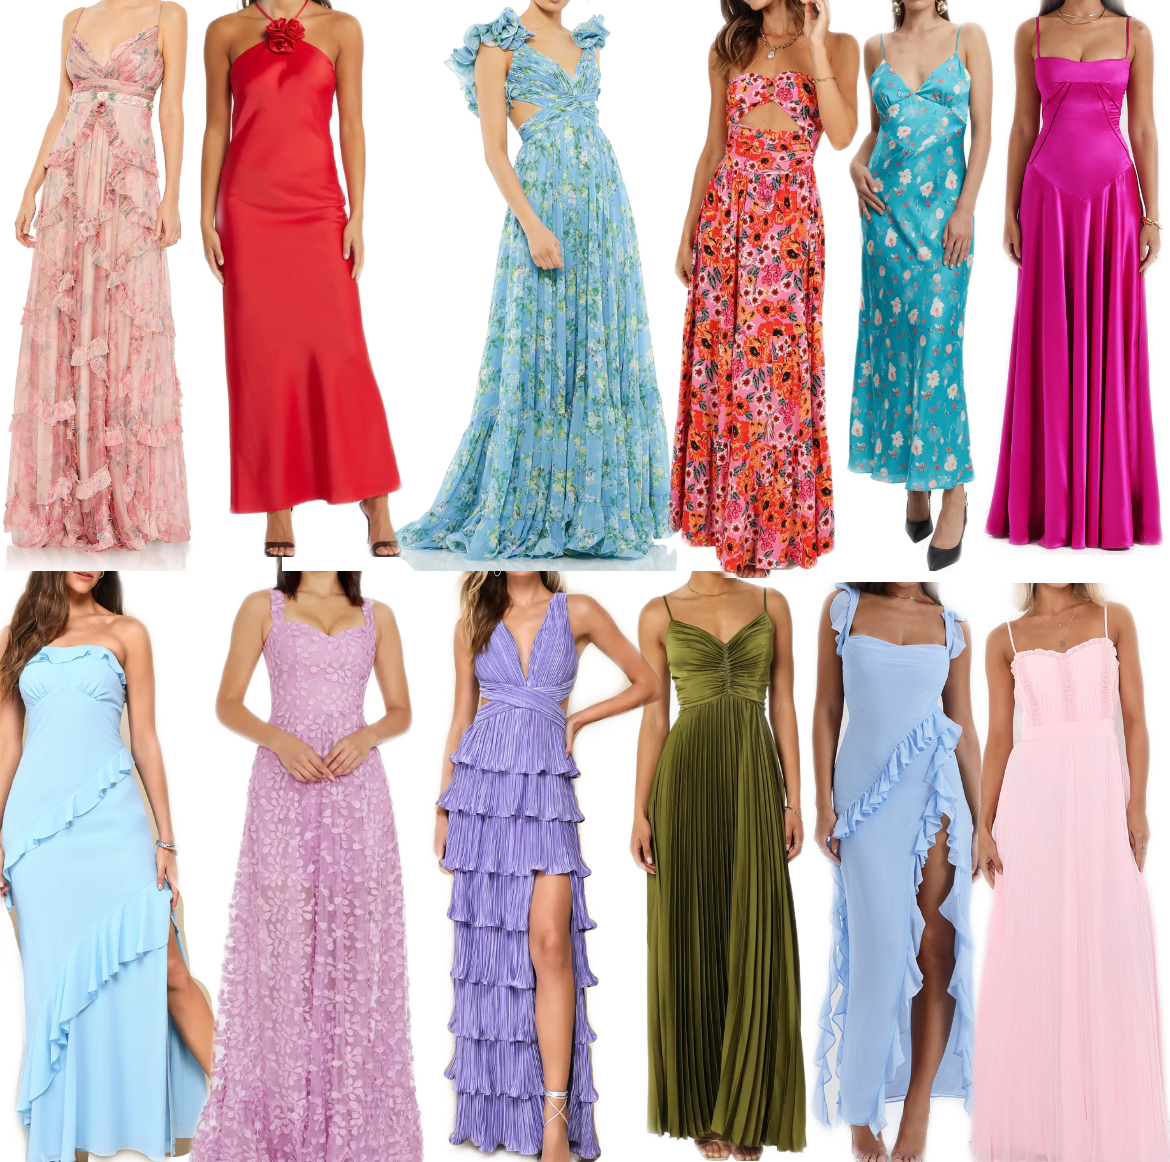 A few of my top picks for less-traditional, Garden Party/Easter dresses for Prom.